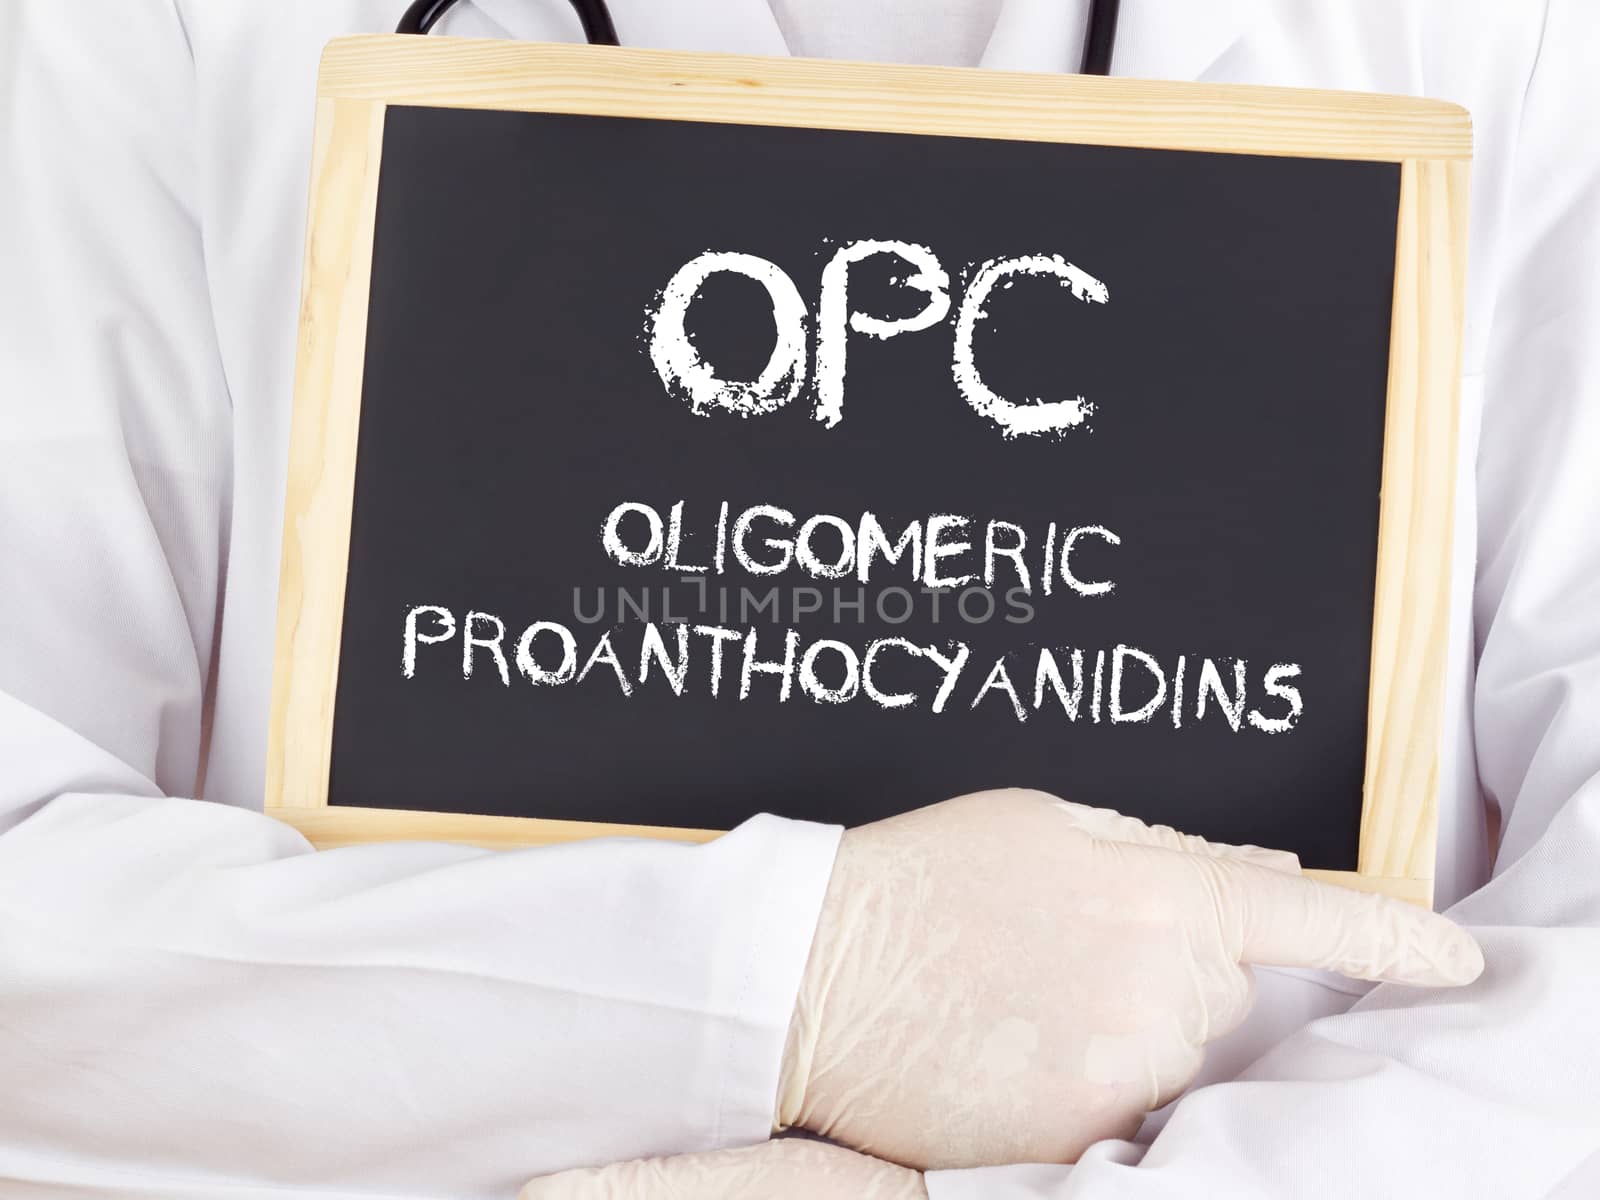 Doctor shows information: Oligomeric proanthocyanidins by gwolters